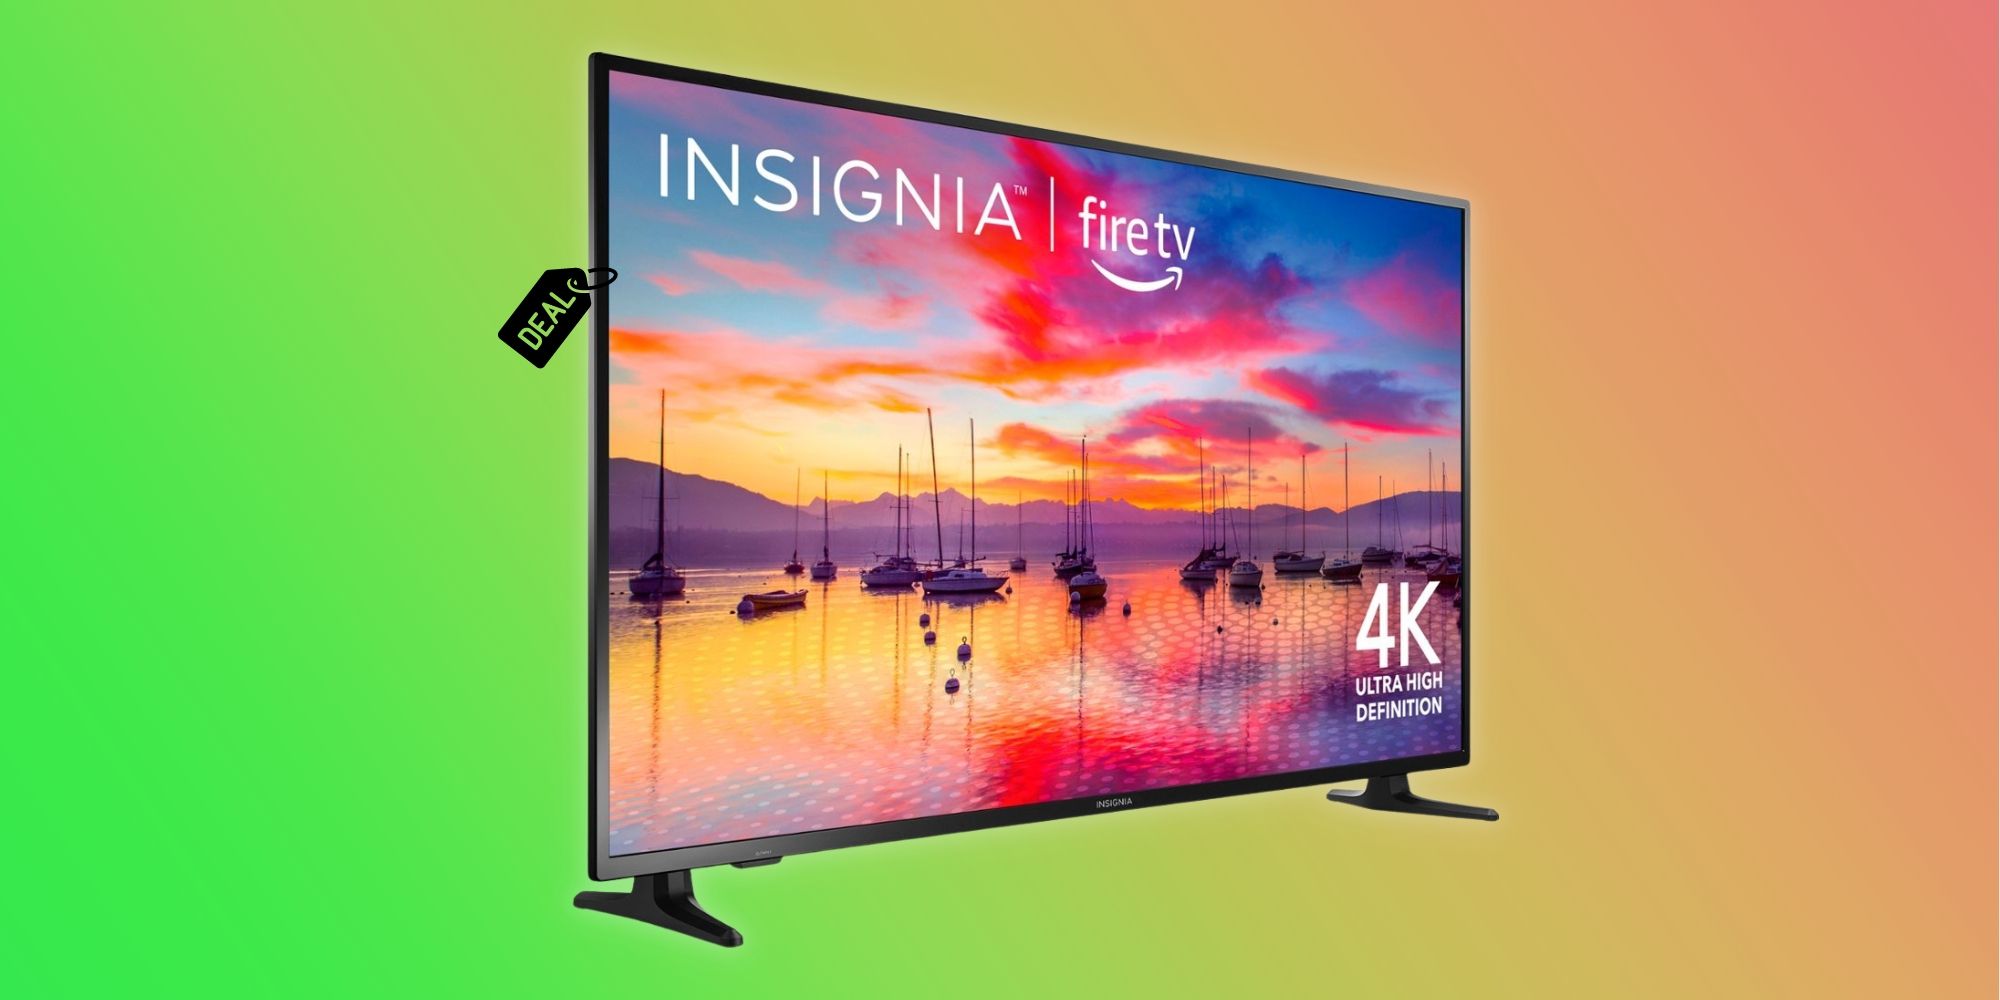 55-inch Insignia 4K Fire TV on a green gradient background